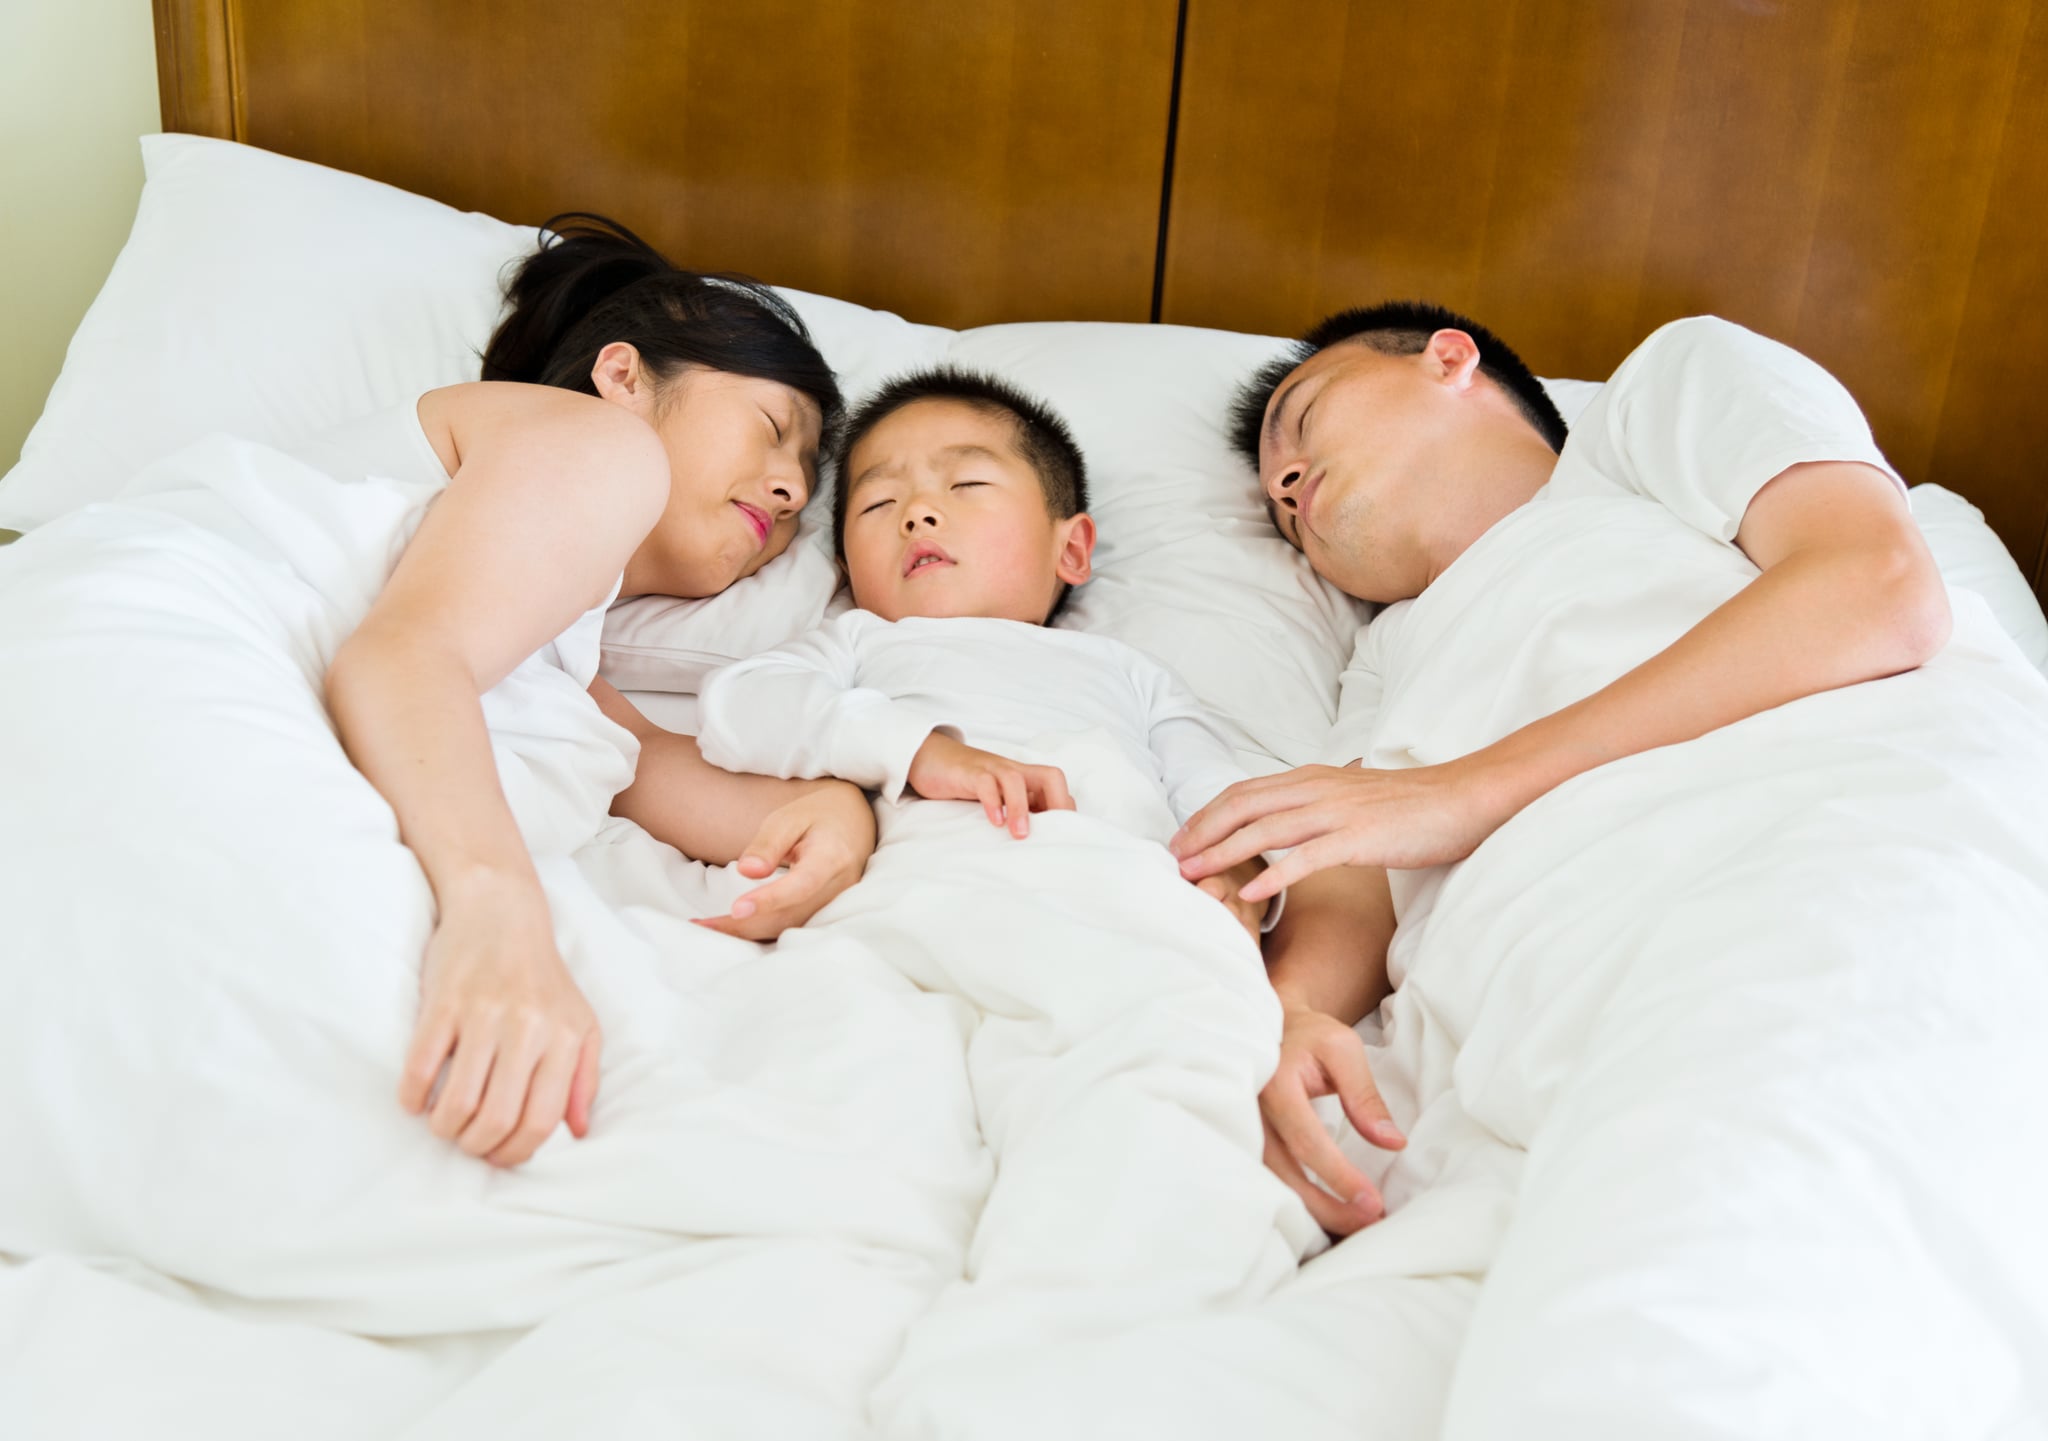 Sleeping family with a little son.